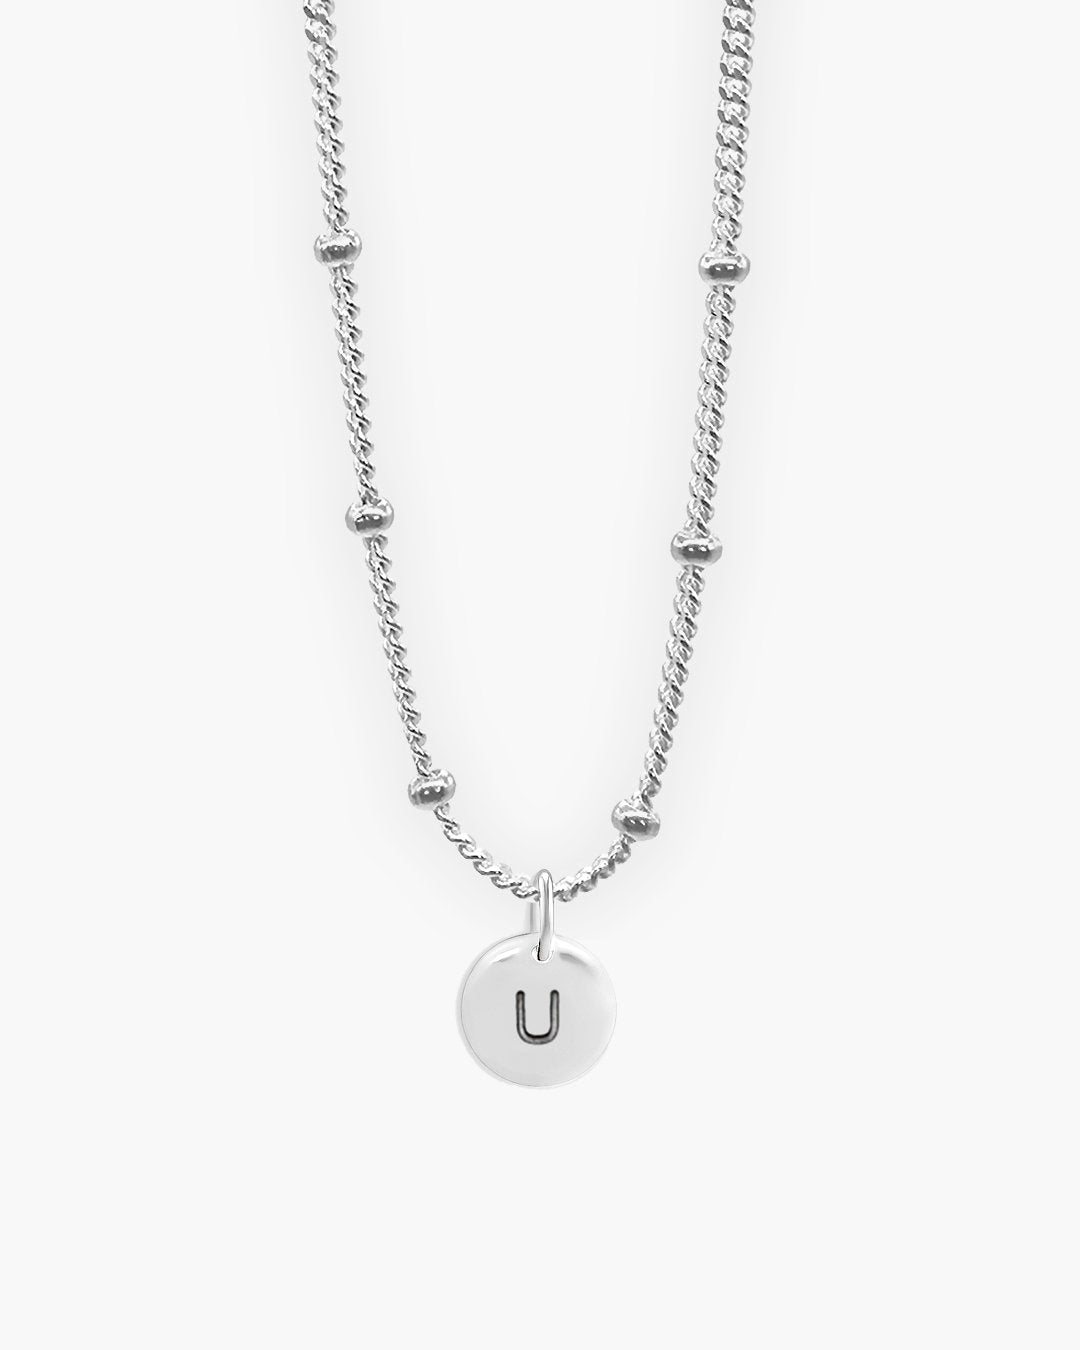 Silver Round Love Letter U Necklace